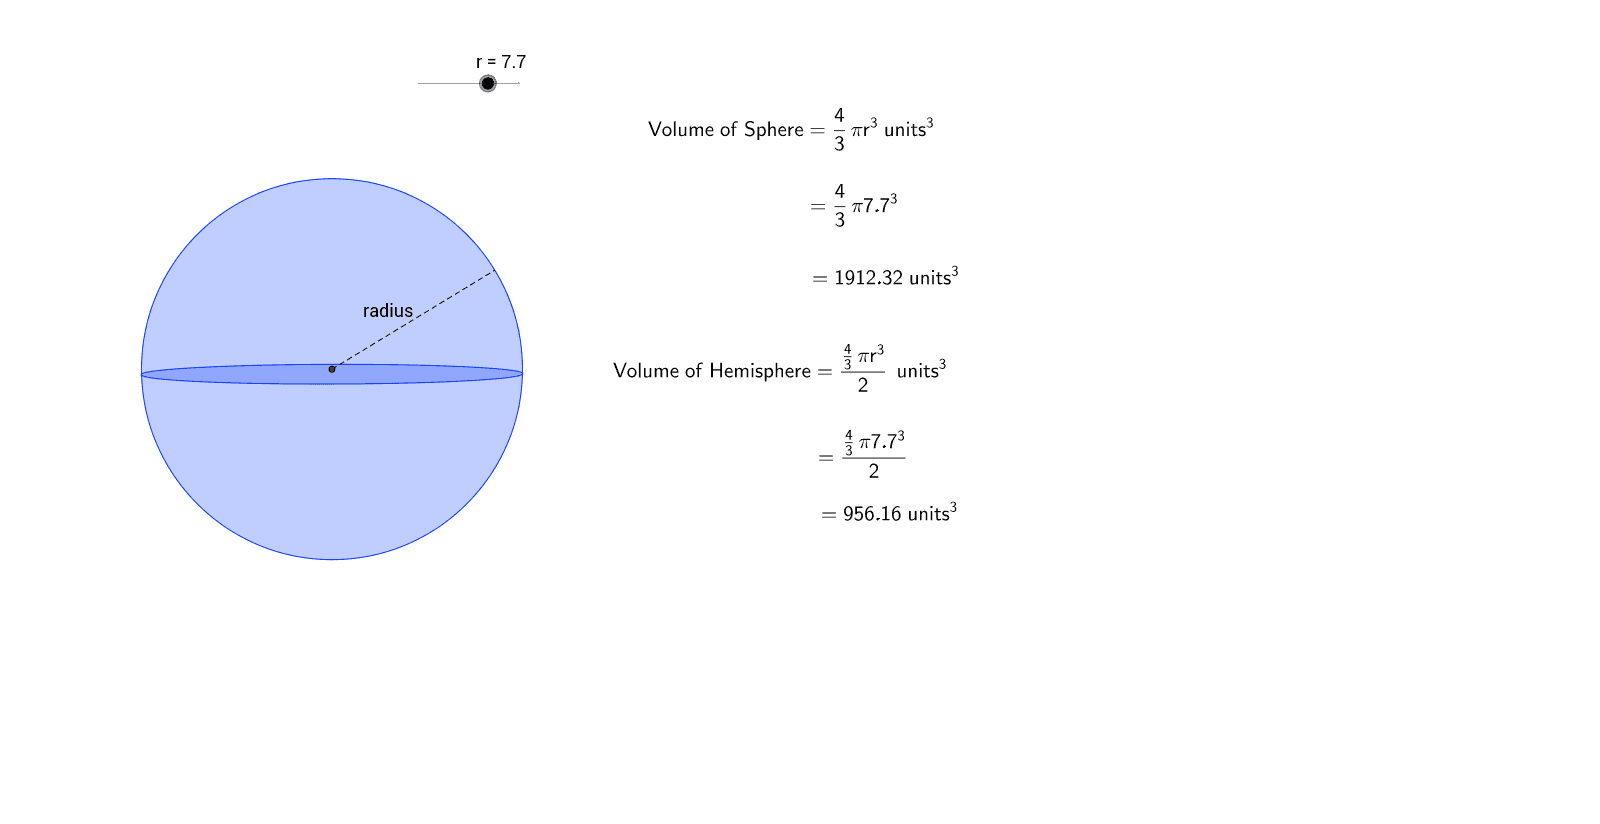 Volume of Sphere Compared to Volume of 